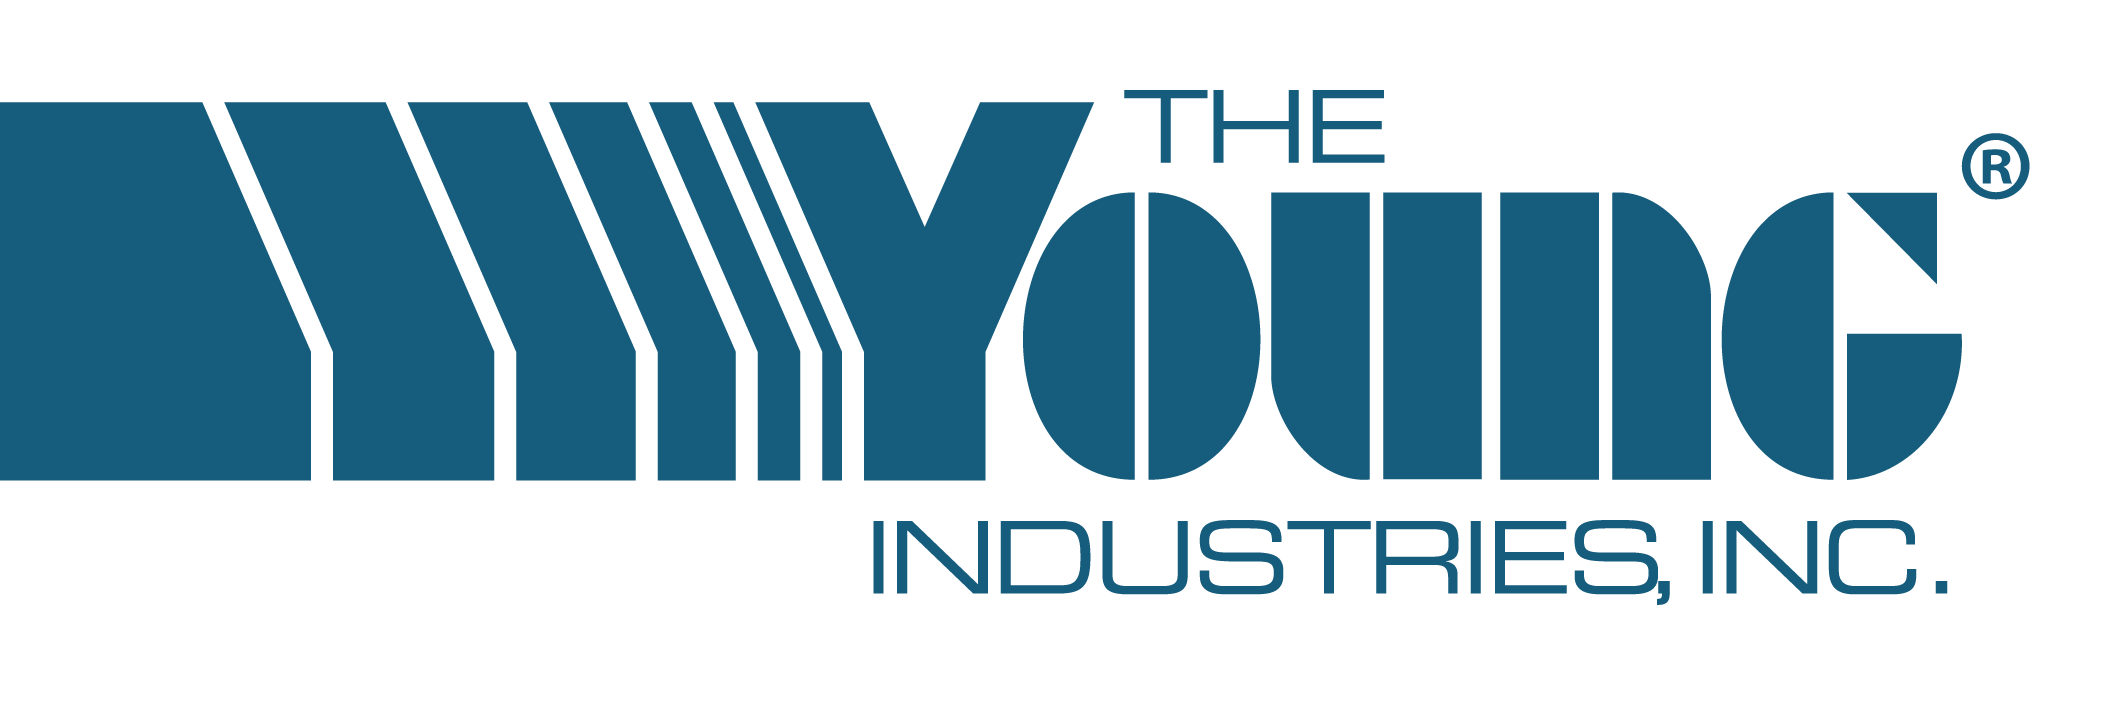 The Young Industries, Inc.